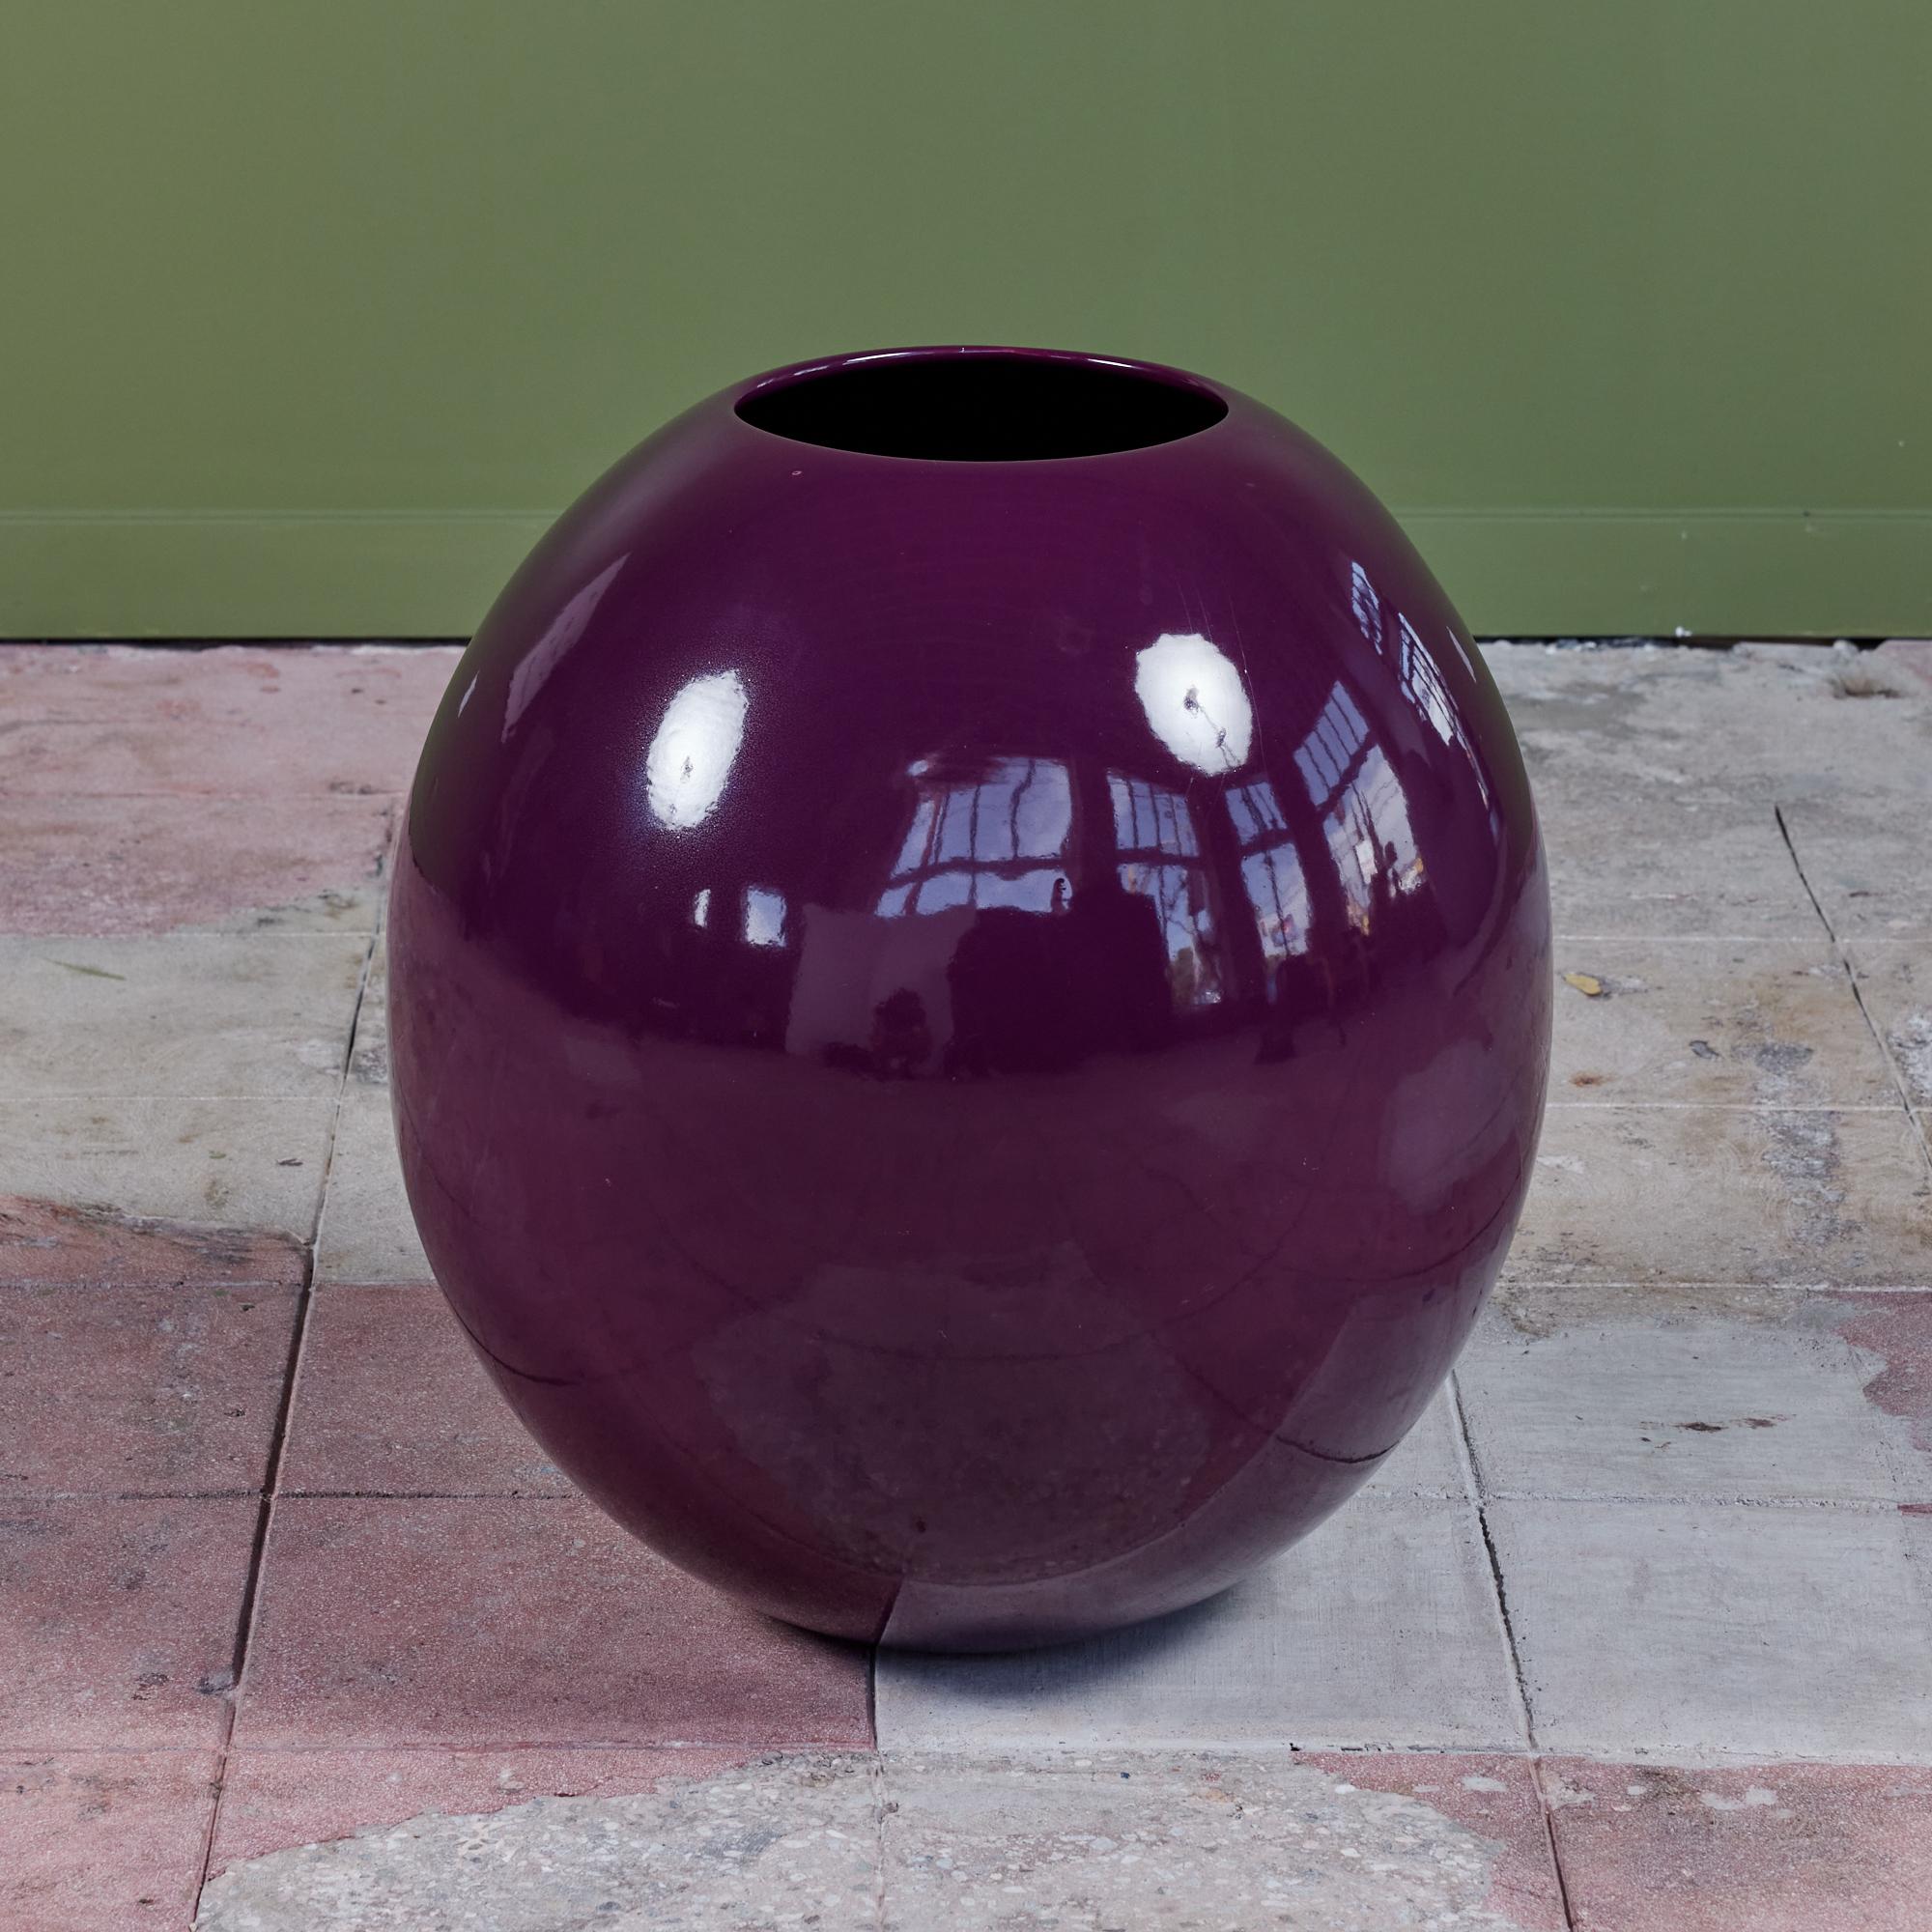 Fabulously large, rounded glazed planter in 'Eggplant' by ceramics artist Marilyn Kay Austin for Architectural Pottery. This example, called the floor vase or egg planter, has an almost spherical design with a small 9.25